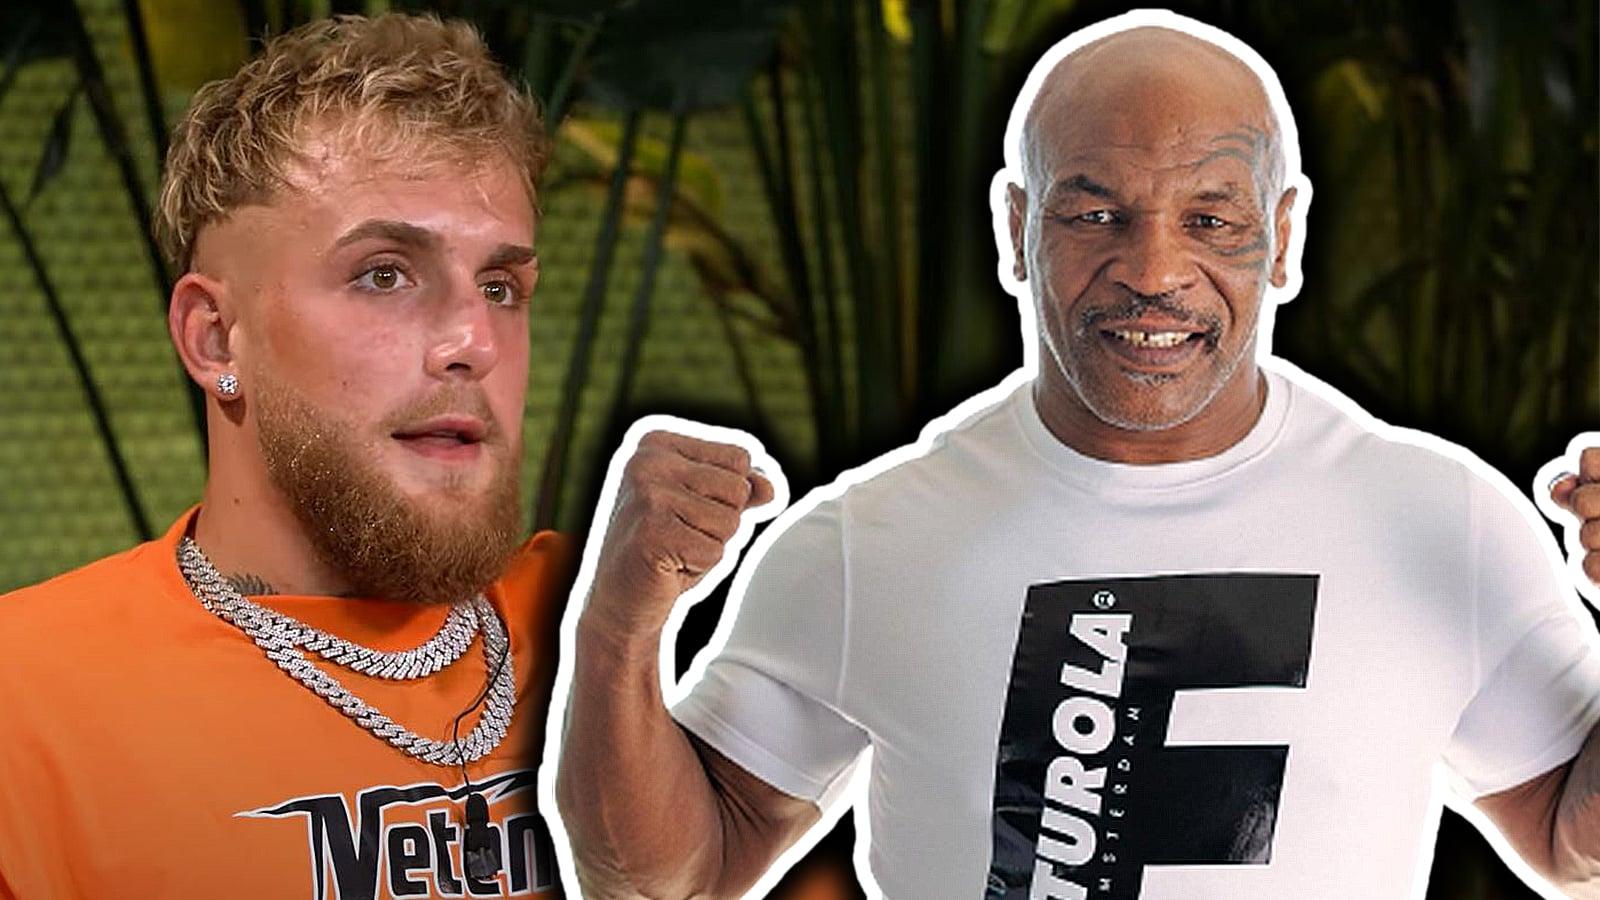 Jake Paul says he could beat Mike Tyson in boxing match